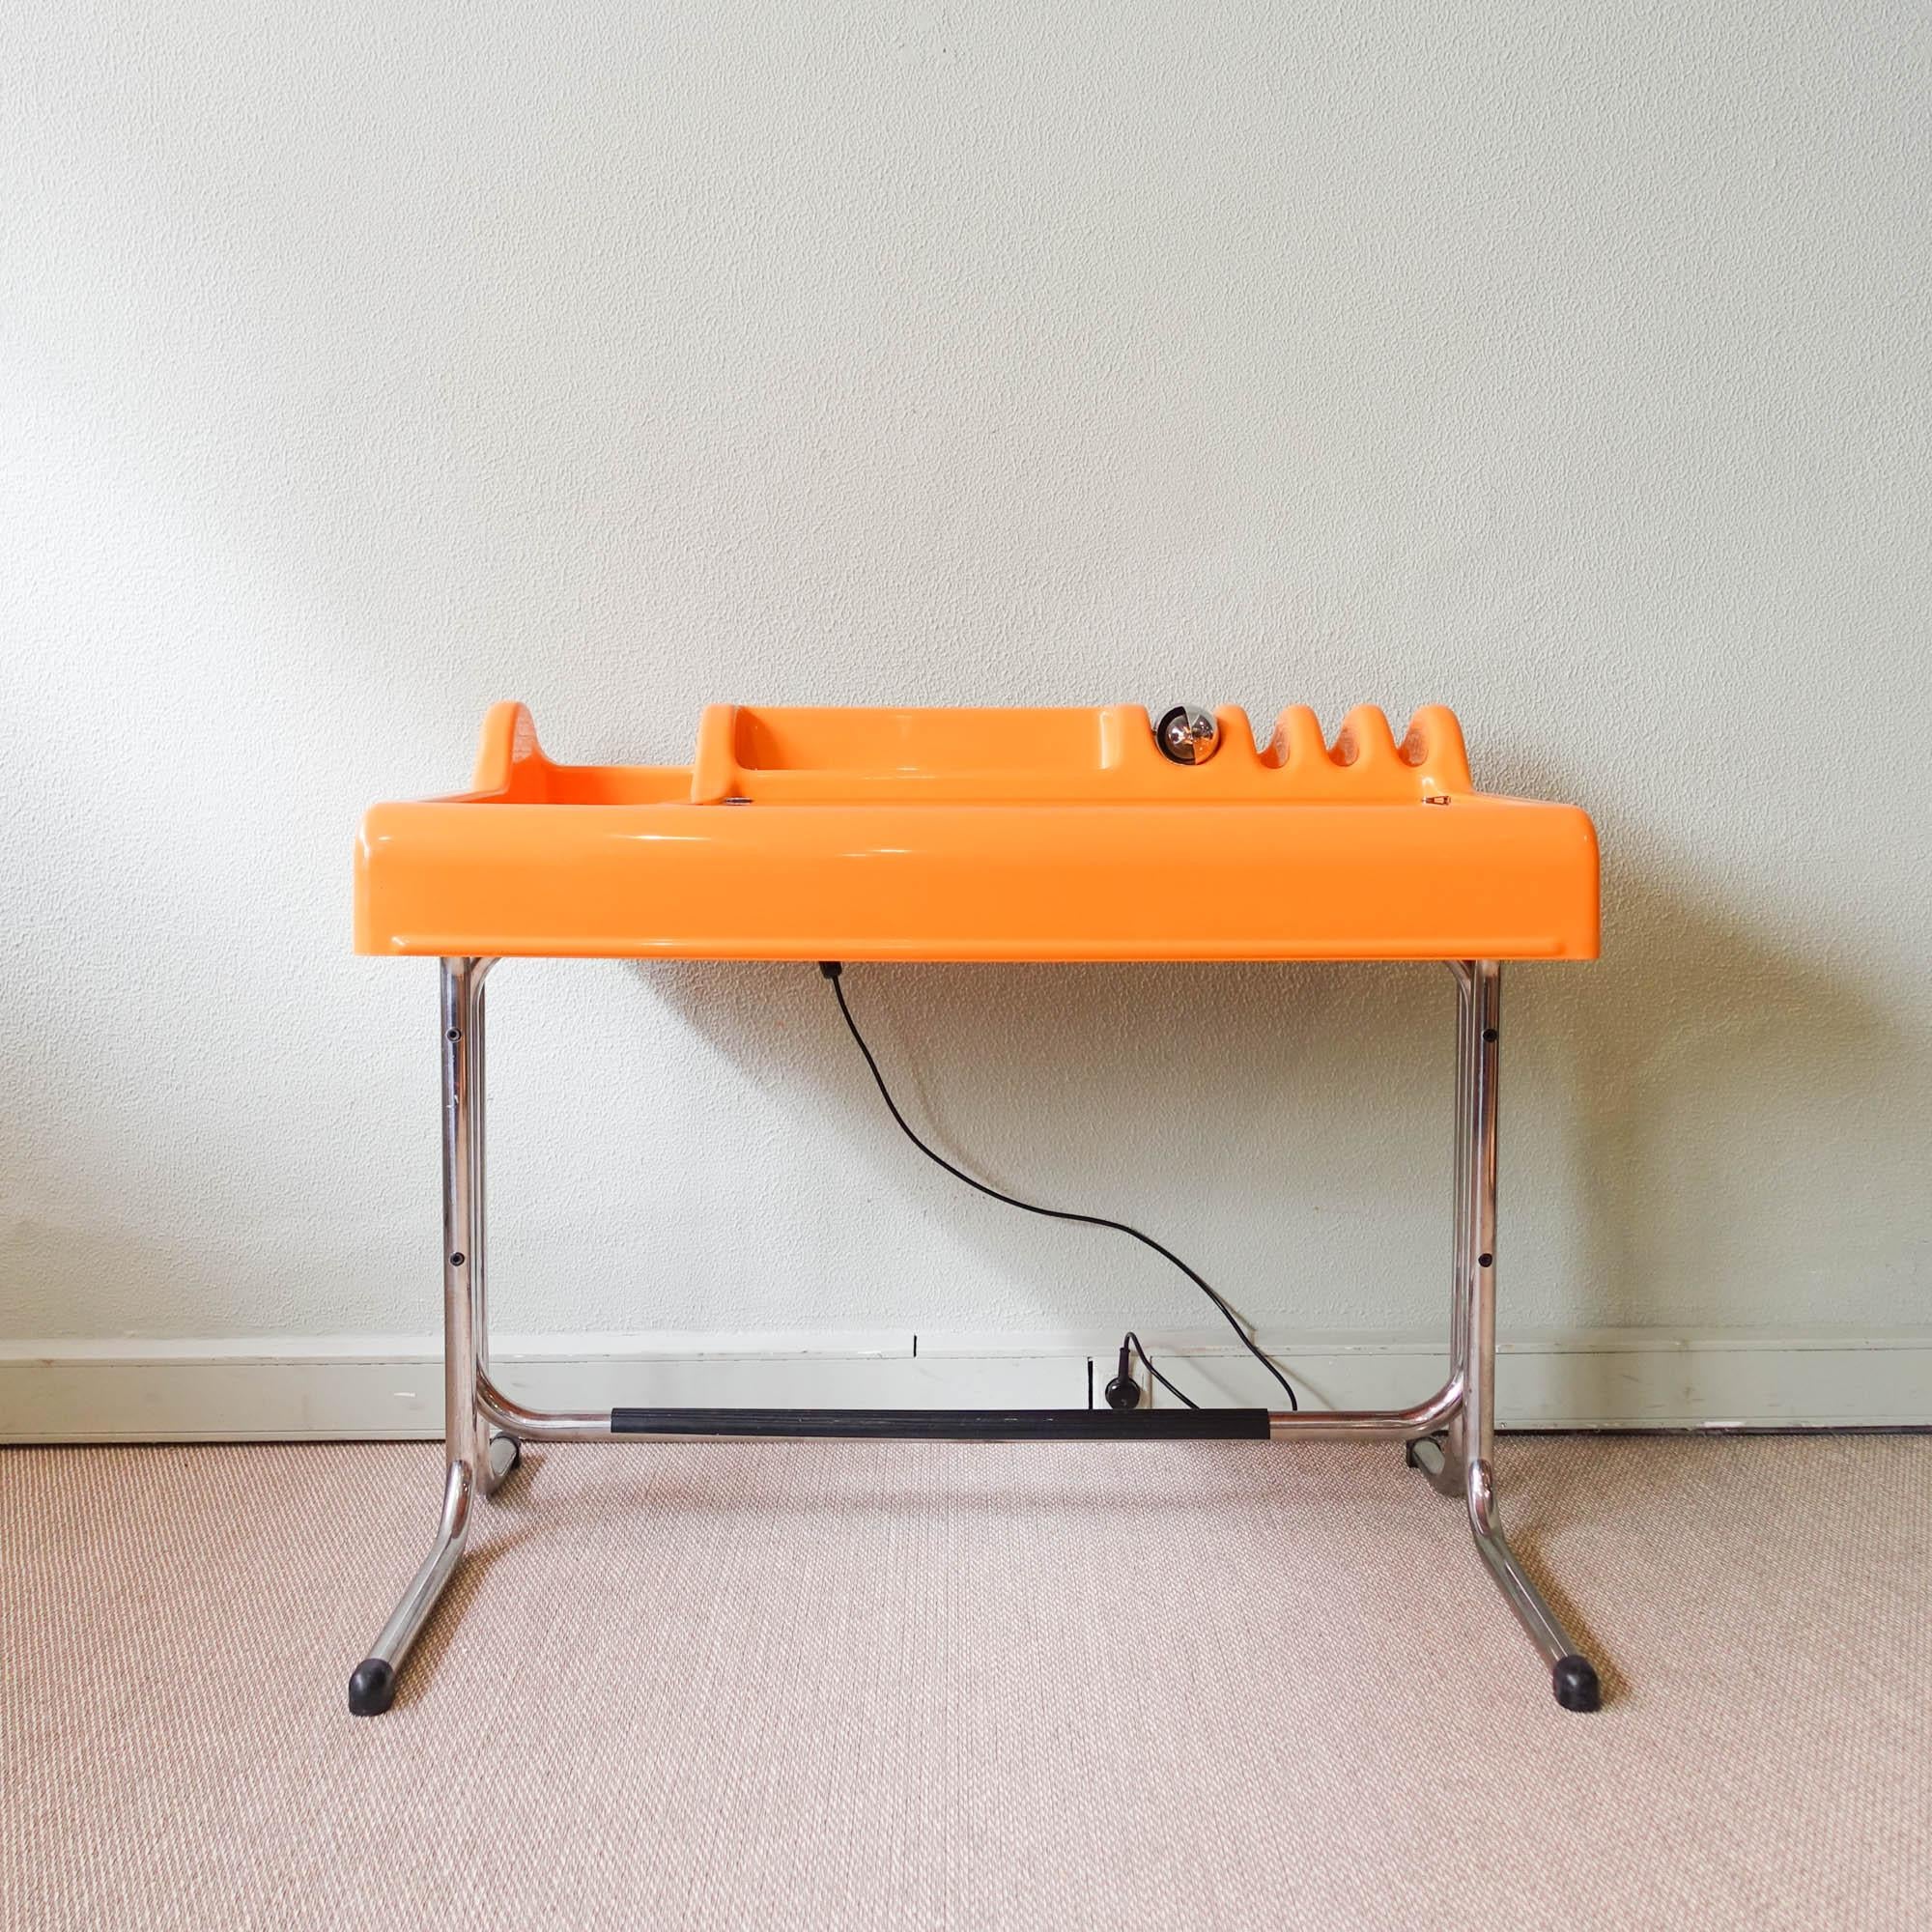 This orange desk, model 'Orix', was designed by Vittorio Parigi and Nani Prina for Molteni. It is in molded ABS plastic with chrome base, hinged glass writing surface and a built-in chromed lamp. It is in original and good condition, with some